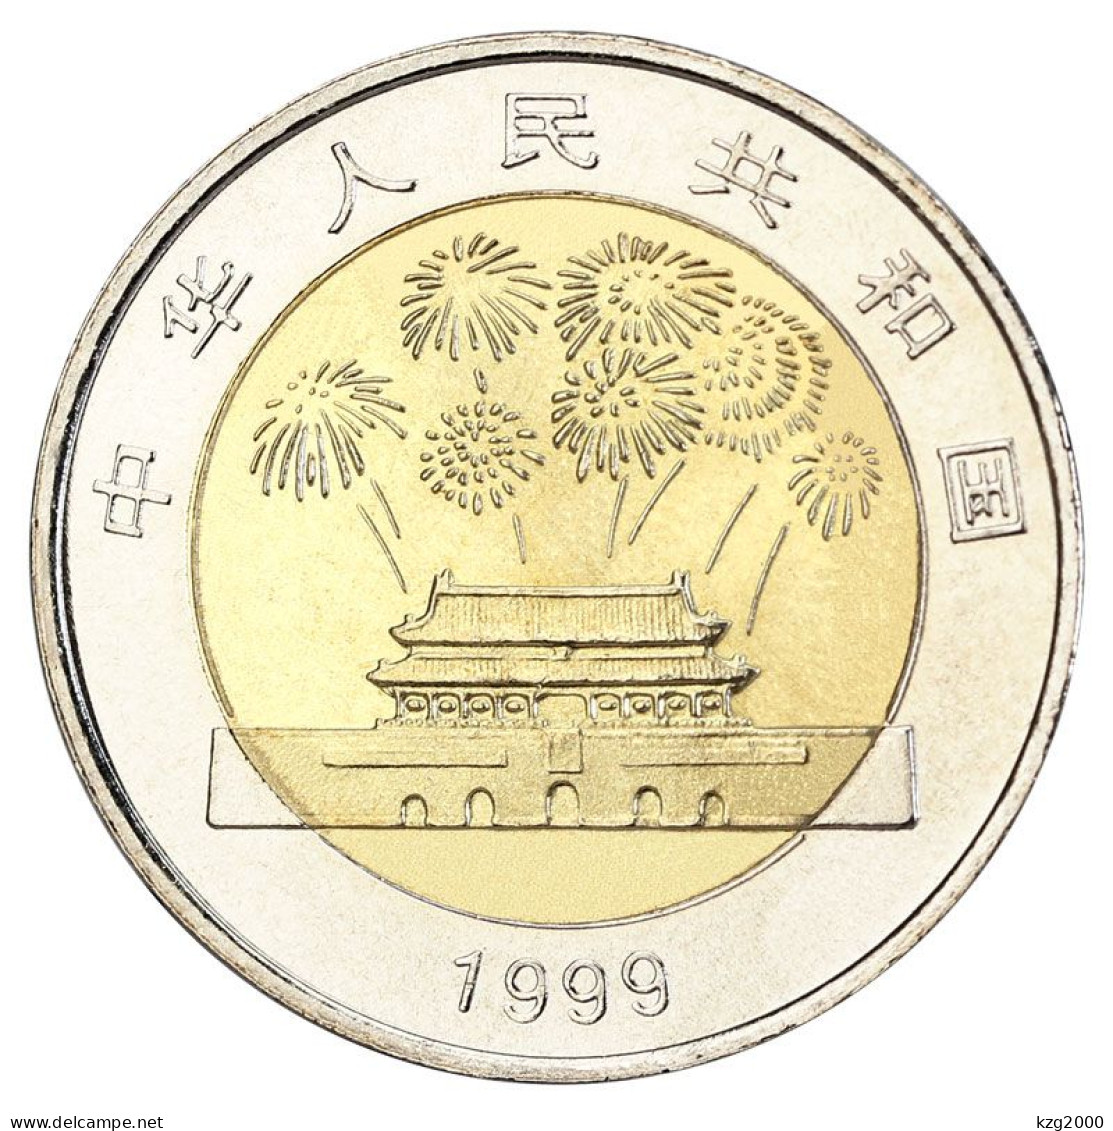 China 10 Yuan Coins 1999 PRC Found 50TH Anniversary COMM Coin 25.5mm Yellow White Copper Alloy Coin 1 Pcs - China